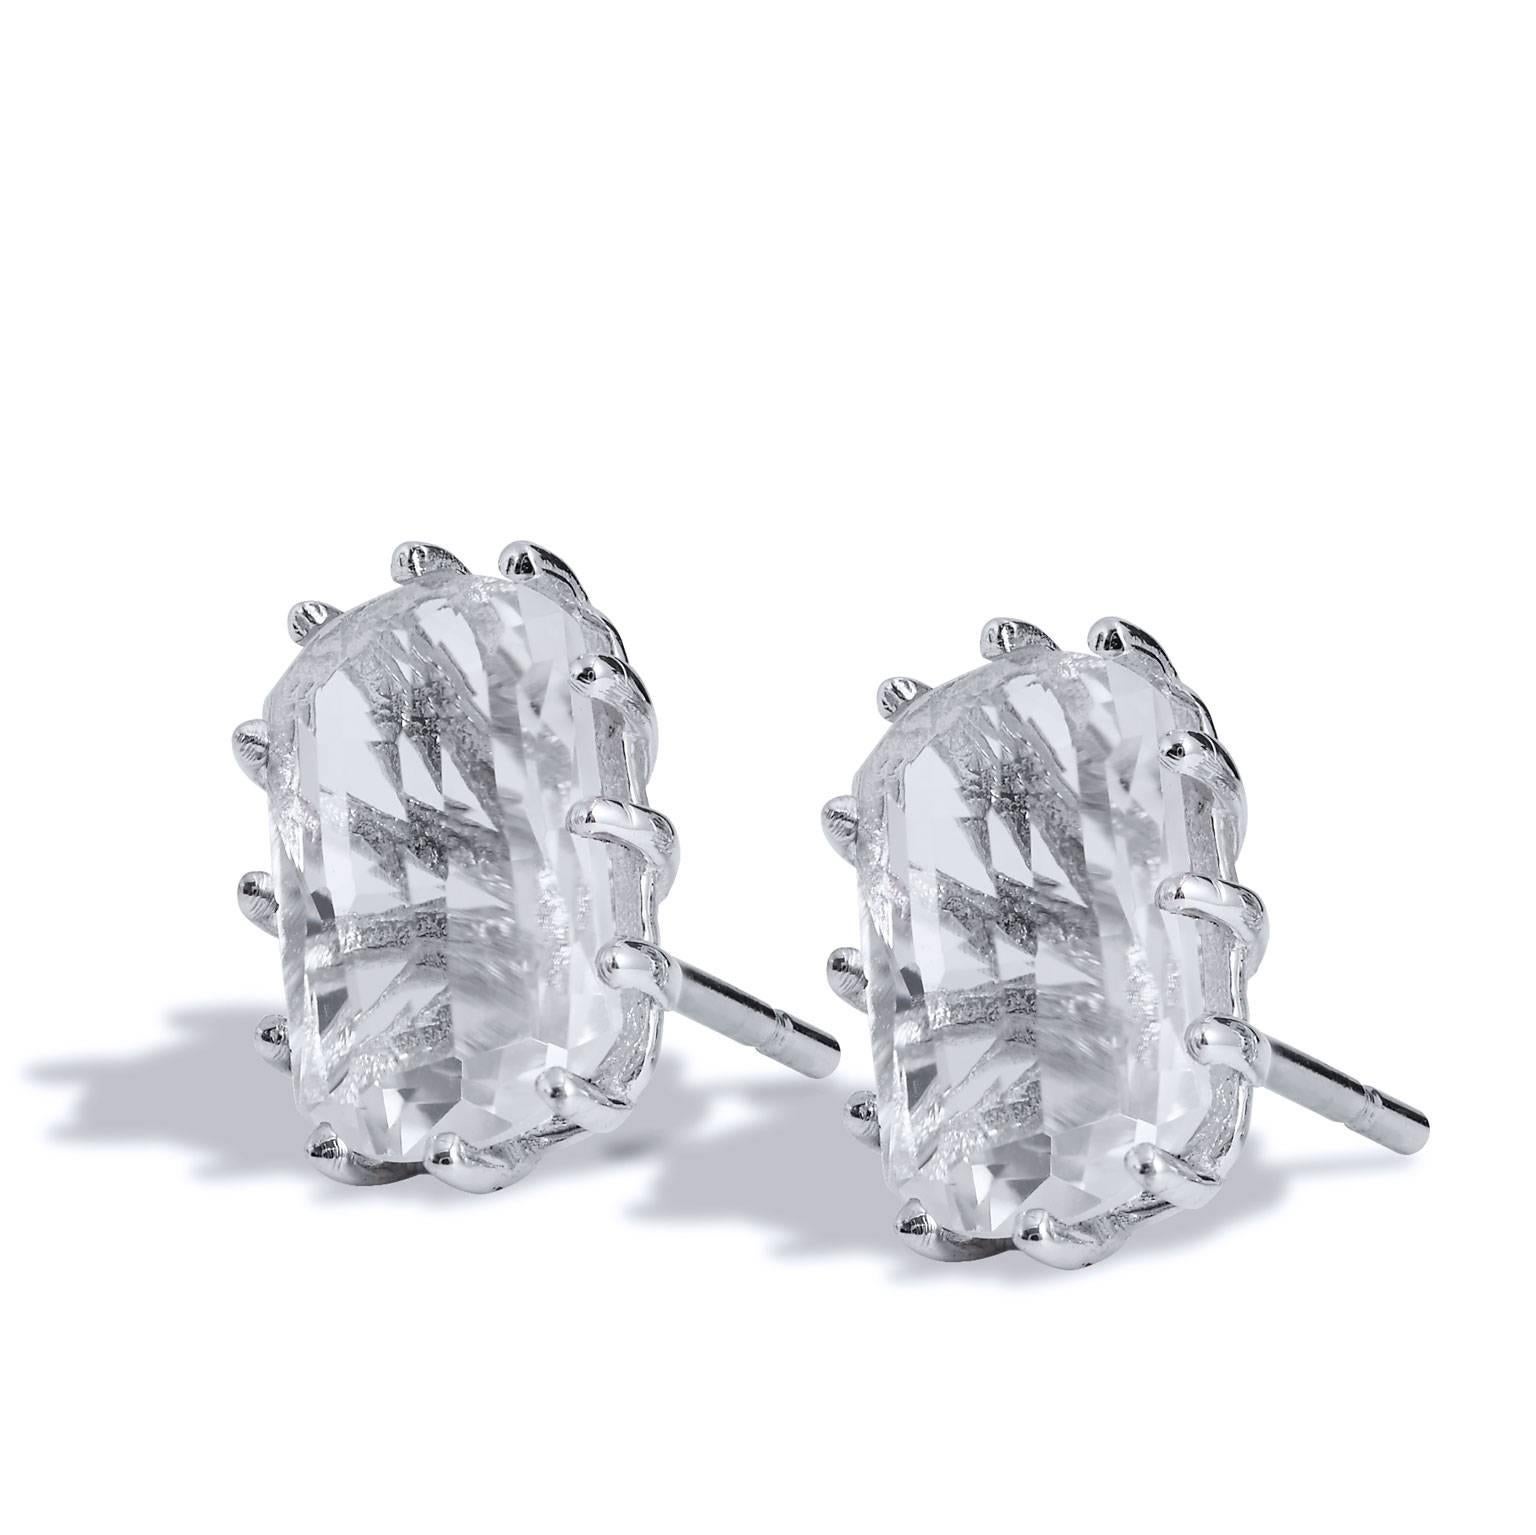 Fashioned in 14 karat white gold, these stud earrings feature two 12 millimeter by 6 millimeter barrel-shaped topaz prong-set with a stylized back.
